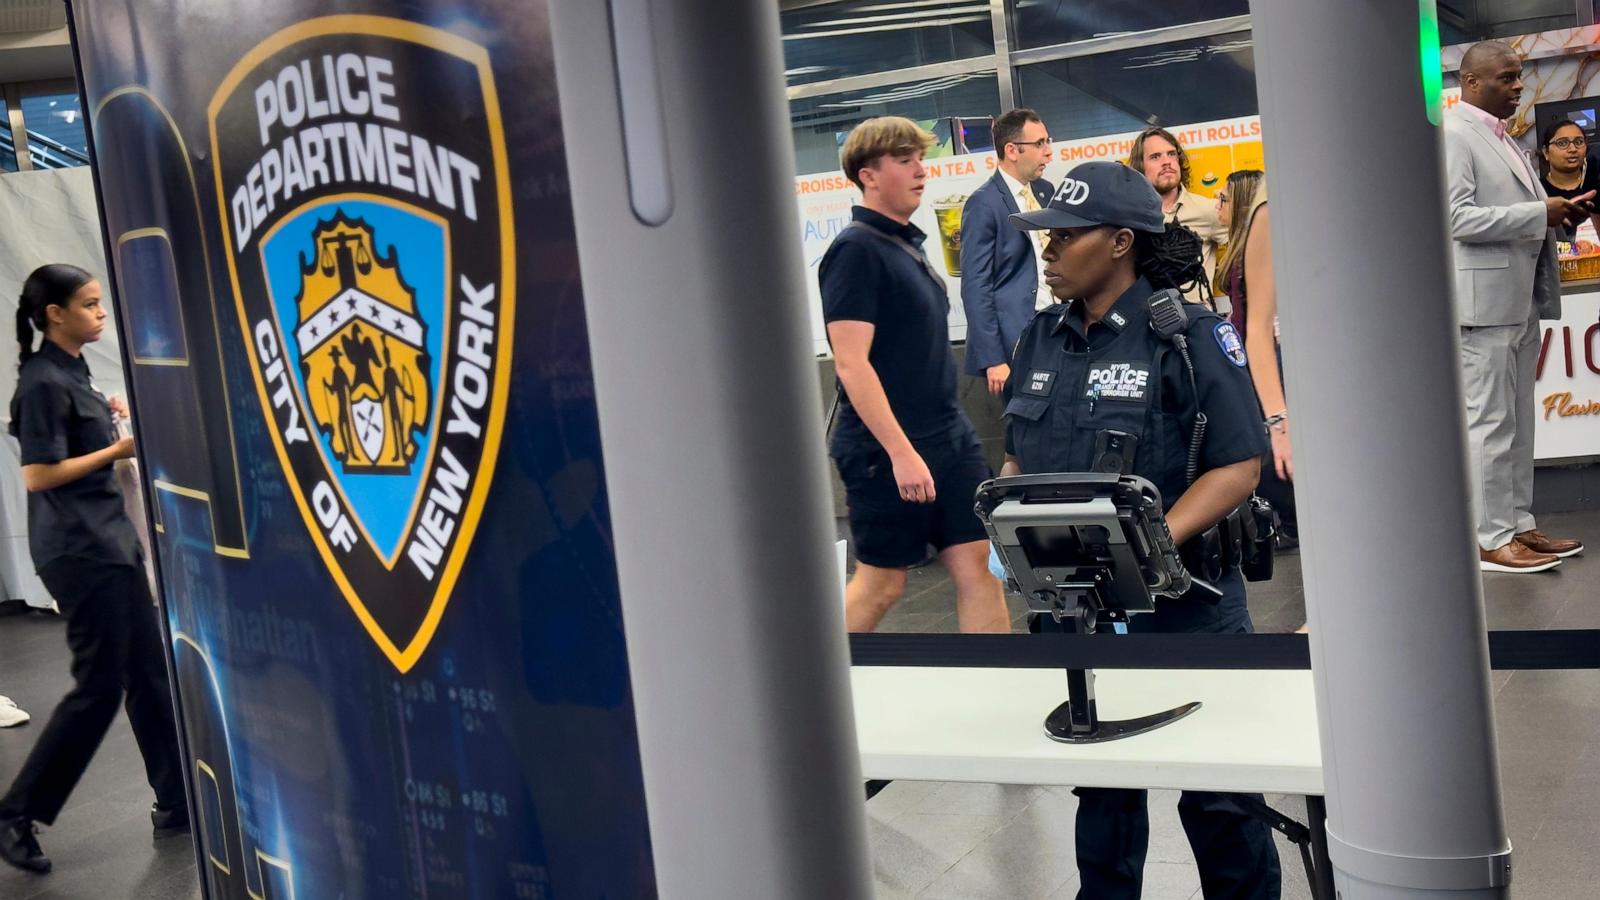 abcnews.go.com -  JAKE OFFENHARTZ Associated Press - New York City turns to AI-powered scanners in push to keep guns out of the subway system